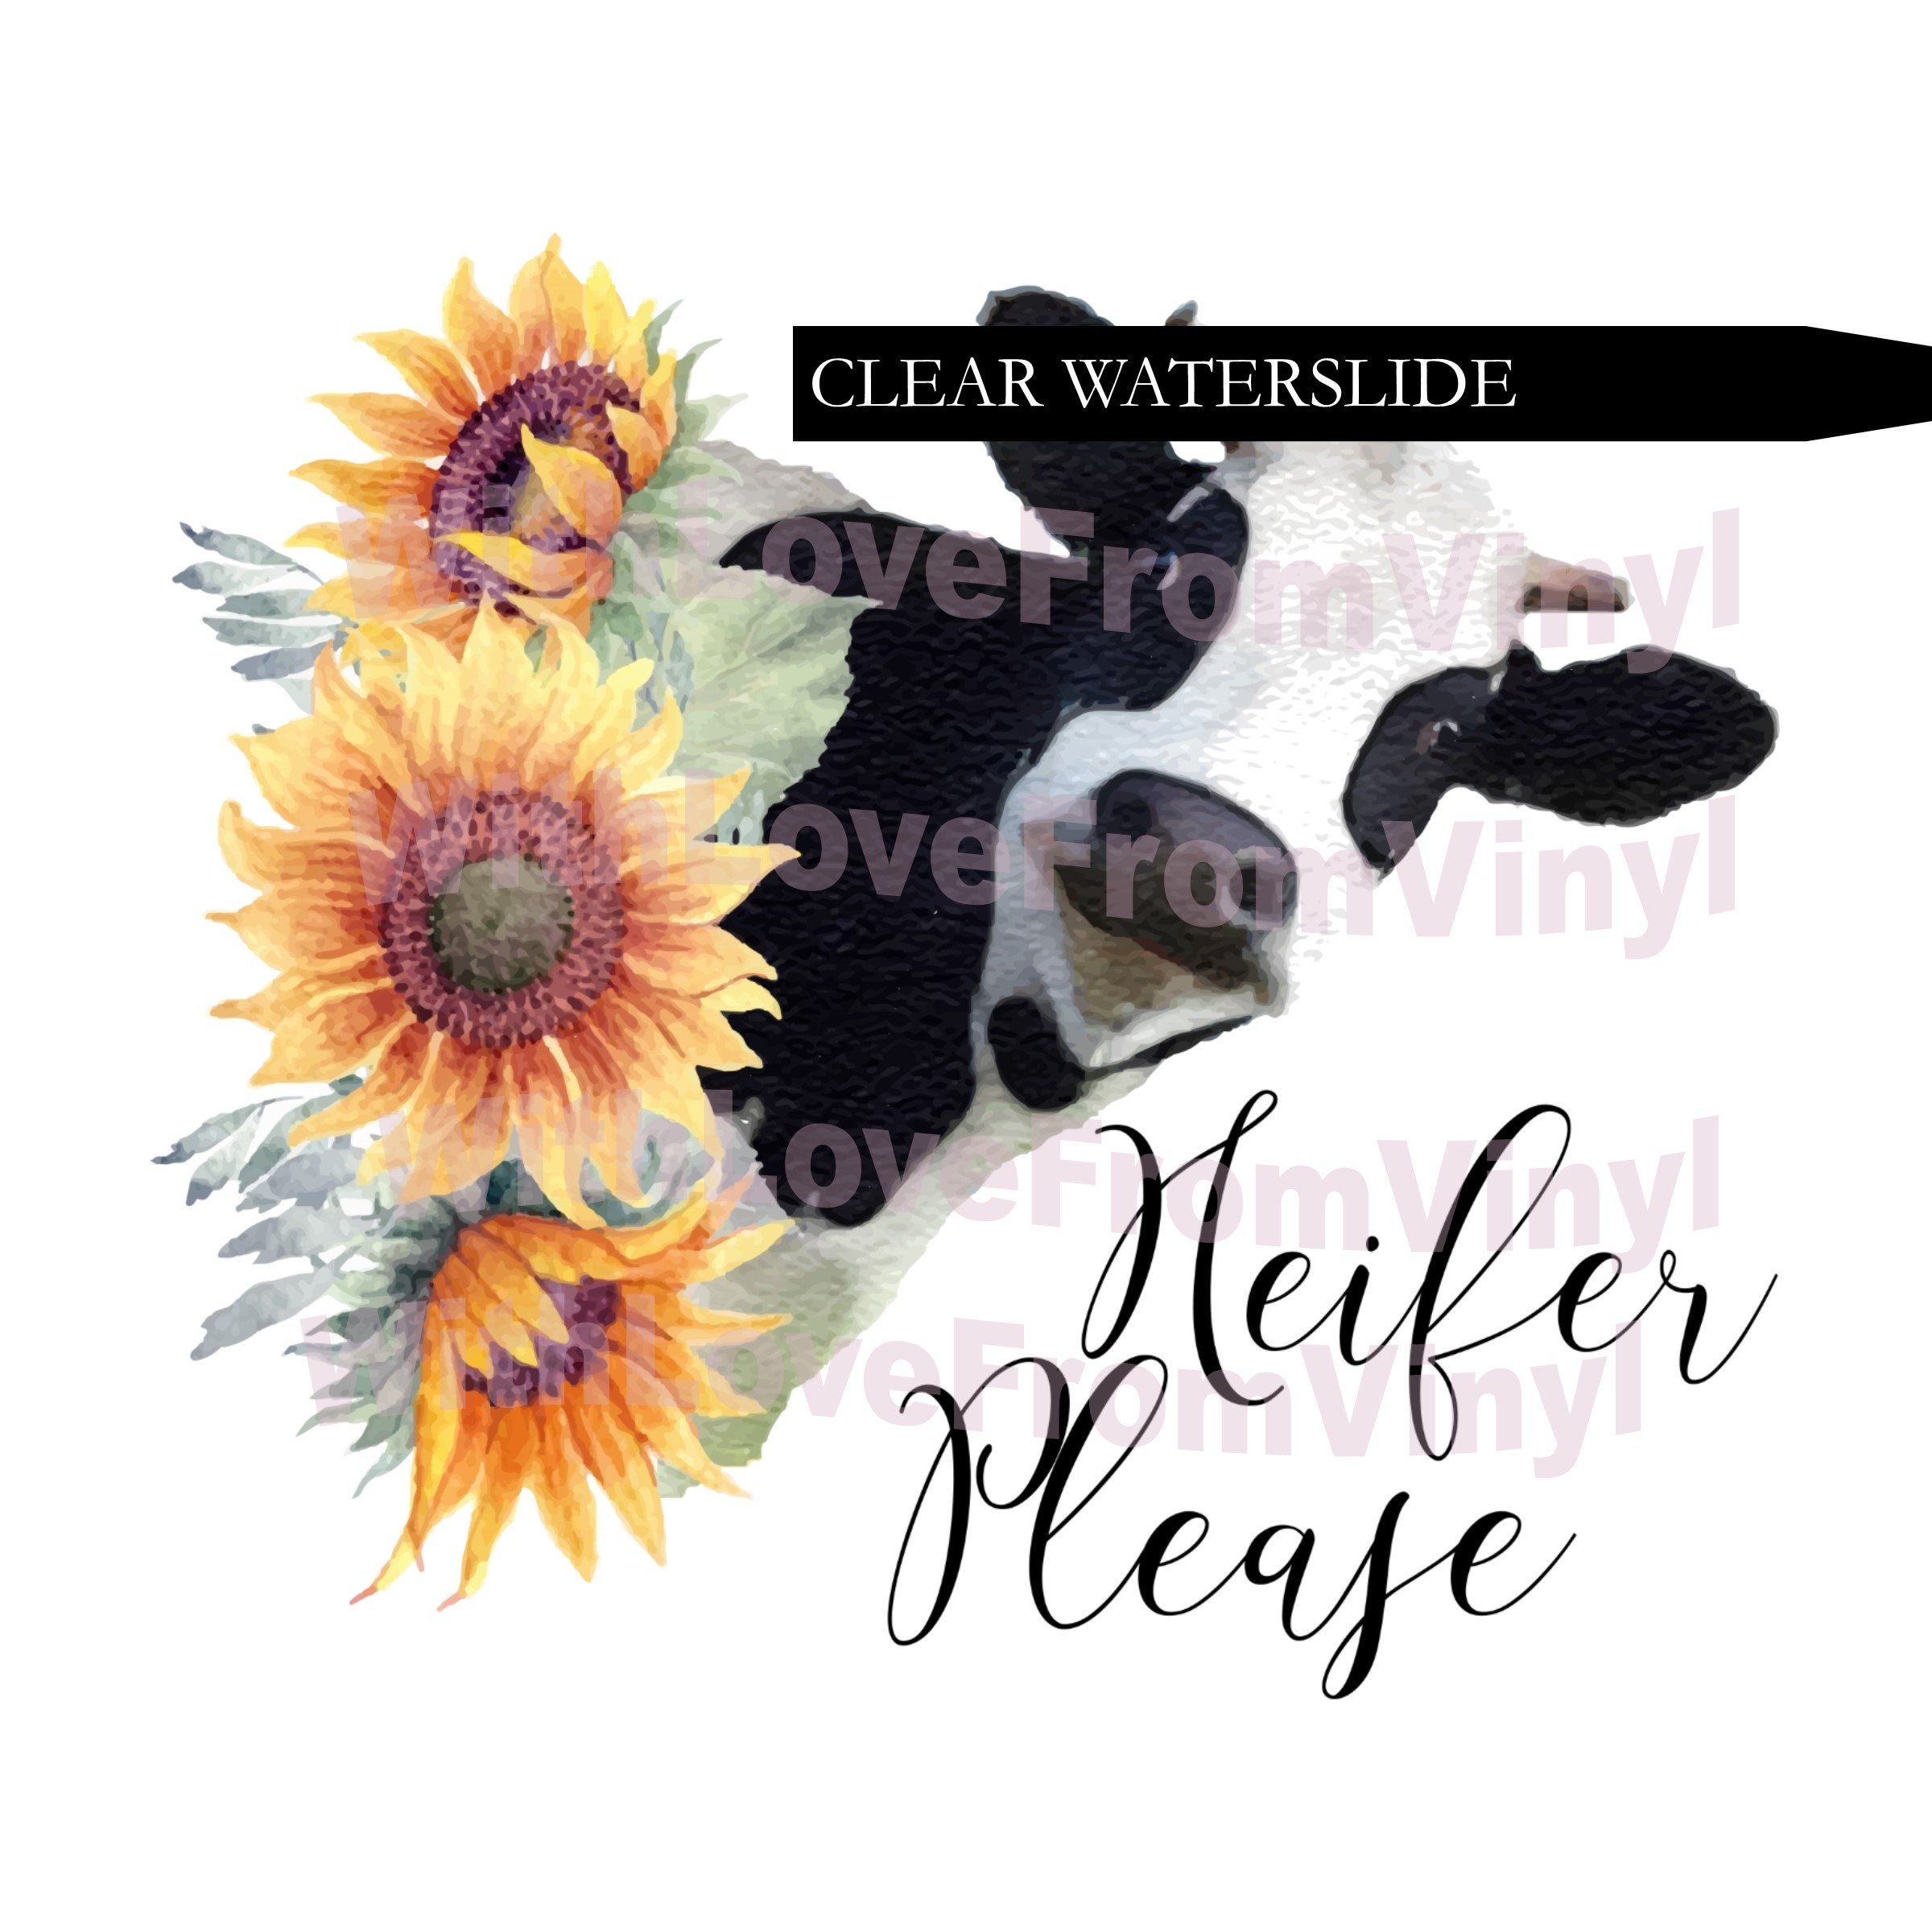 Dragon Fly Clear Waterslide Decal for Tumbler Making Ready to